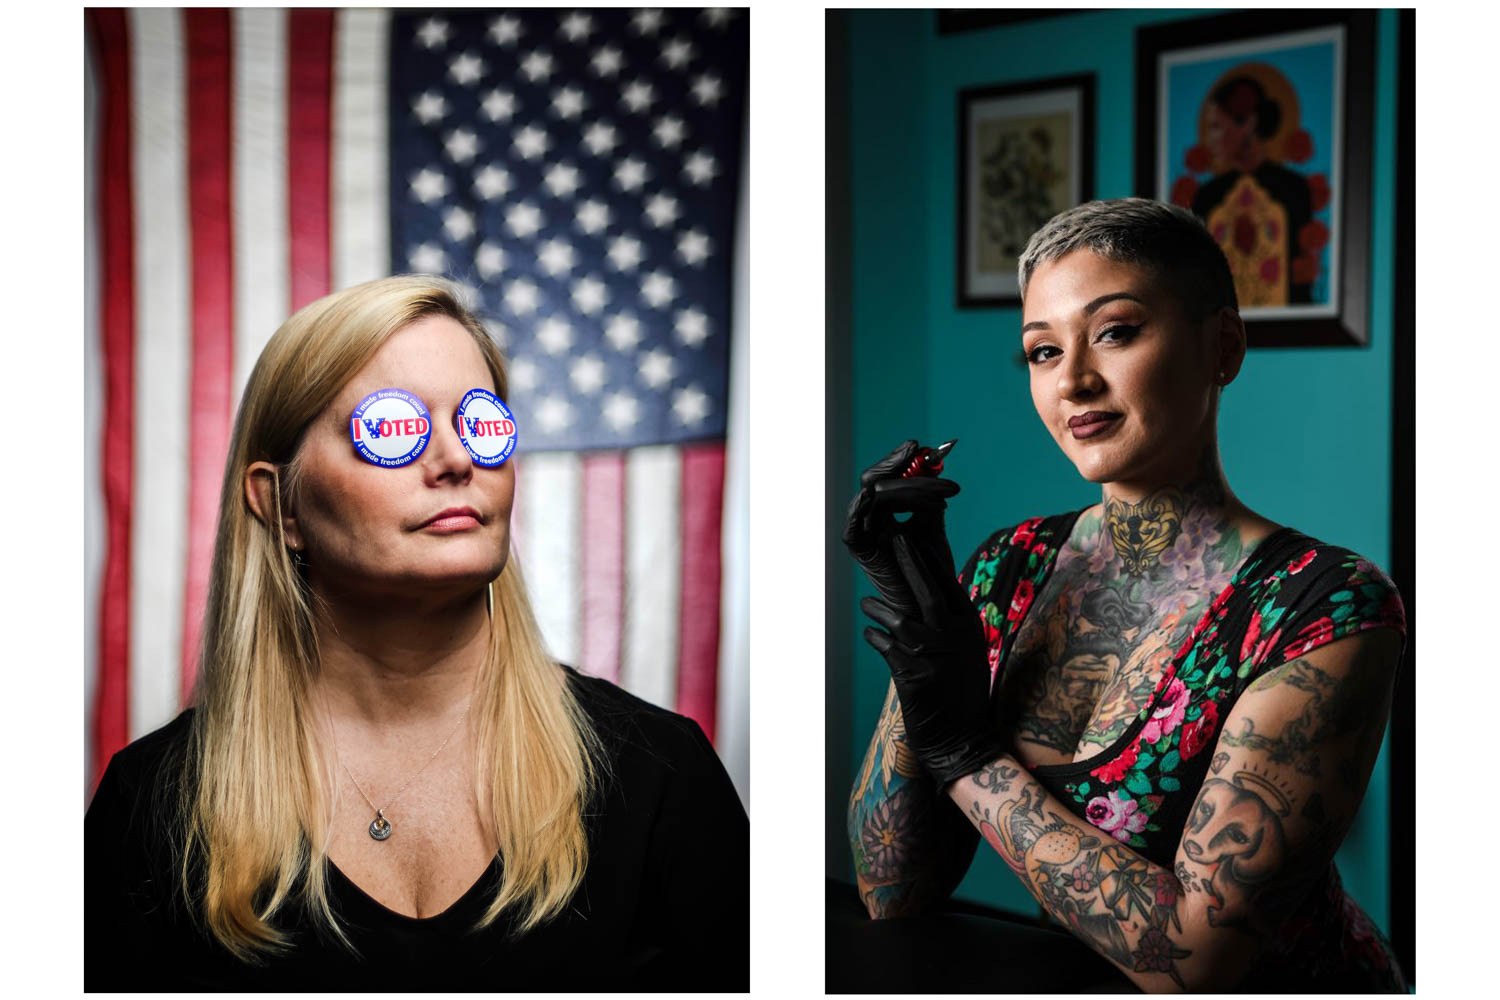 Voters Guide Cover with model Chris Cashion ------ Tattoo artist Chelsea 'Chewy' Soto in her studio for cover of QC@Work edition. (Todd Mizener - Dispatch/Argus) 